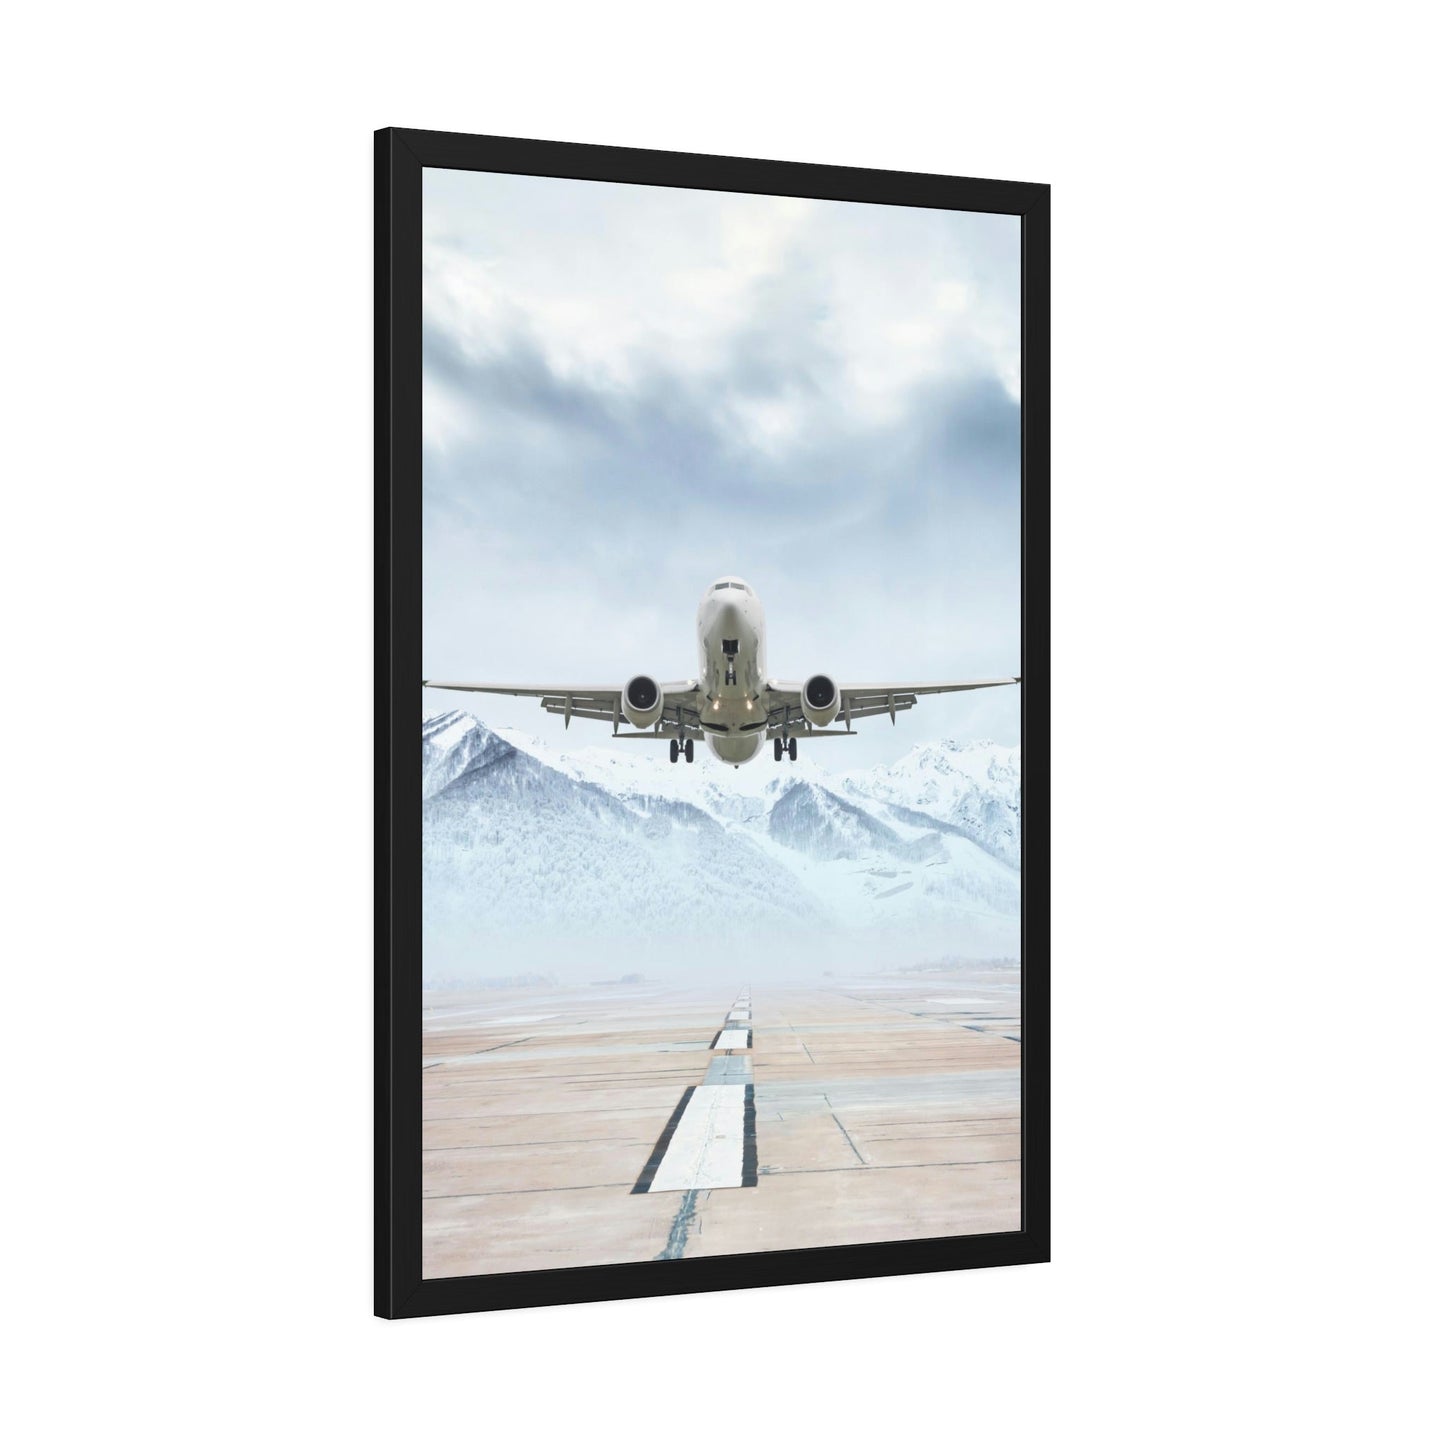 Flight of Wonder: Framed Poster & Canvas of the World's Most Fascinating Airplane